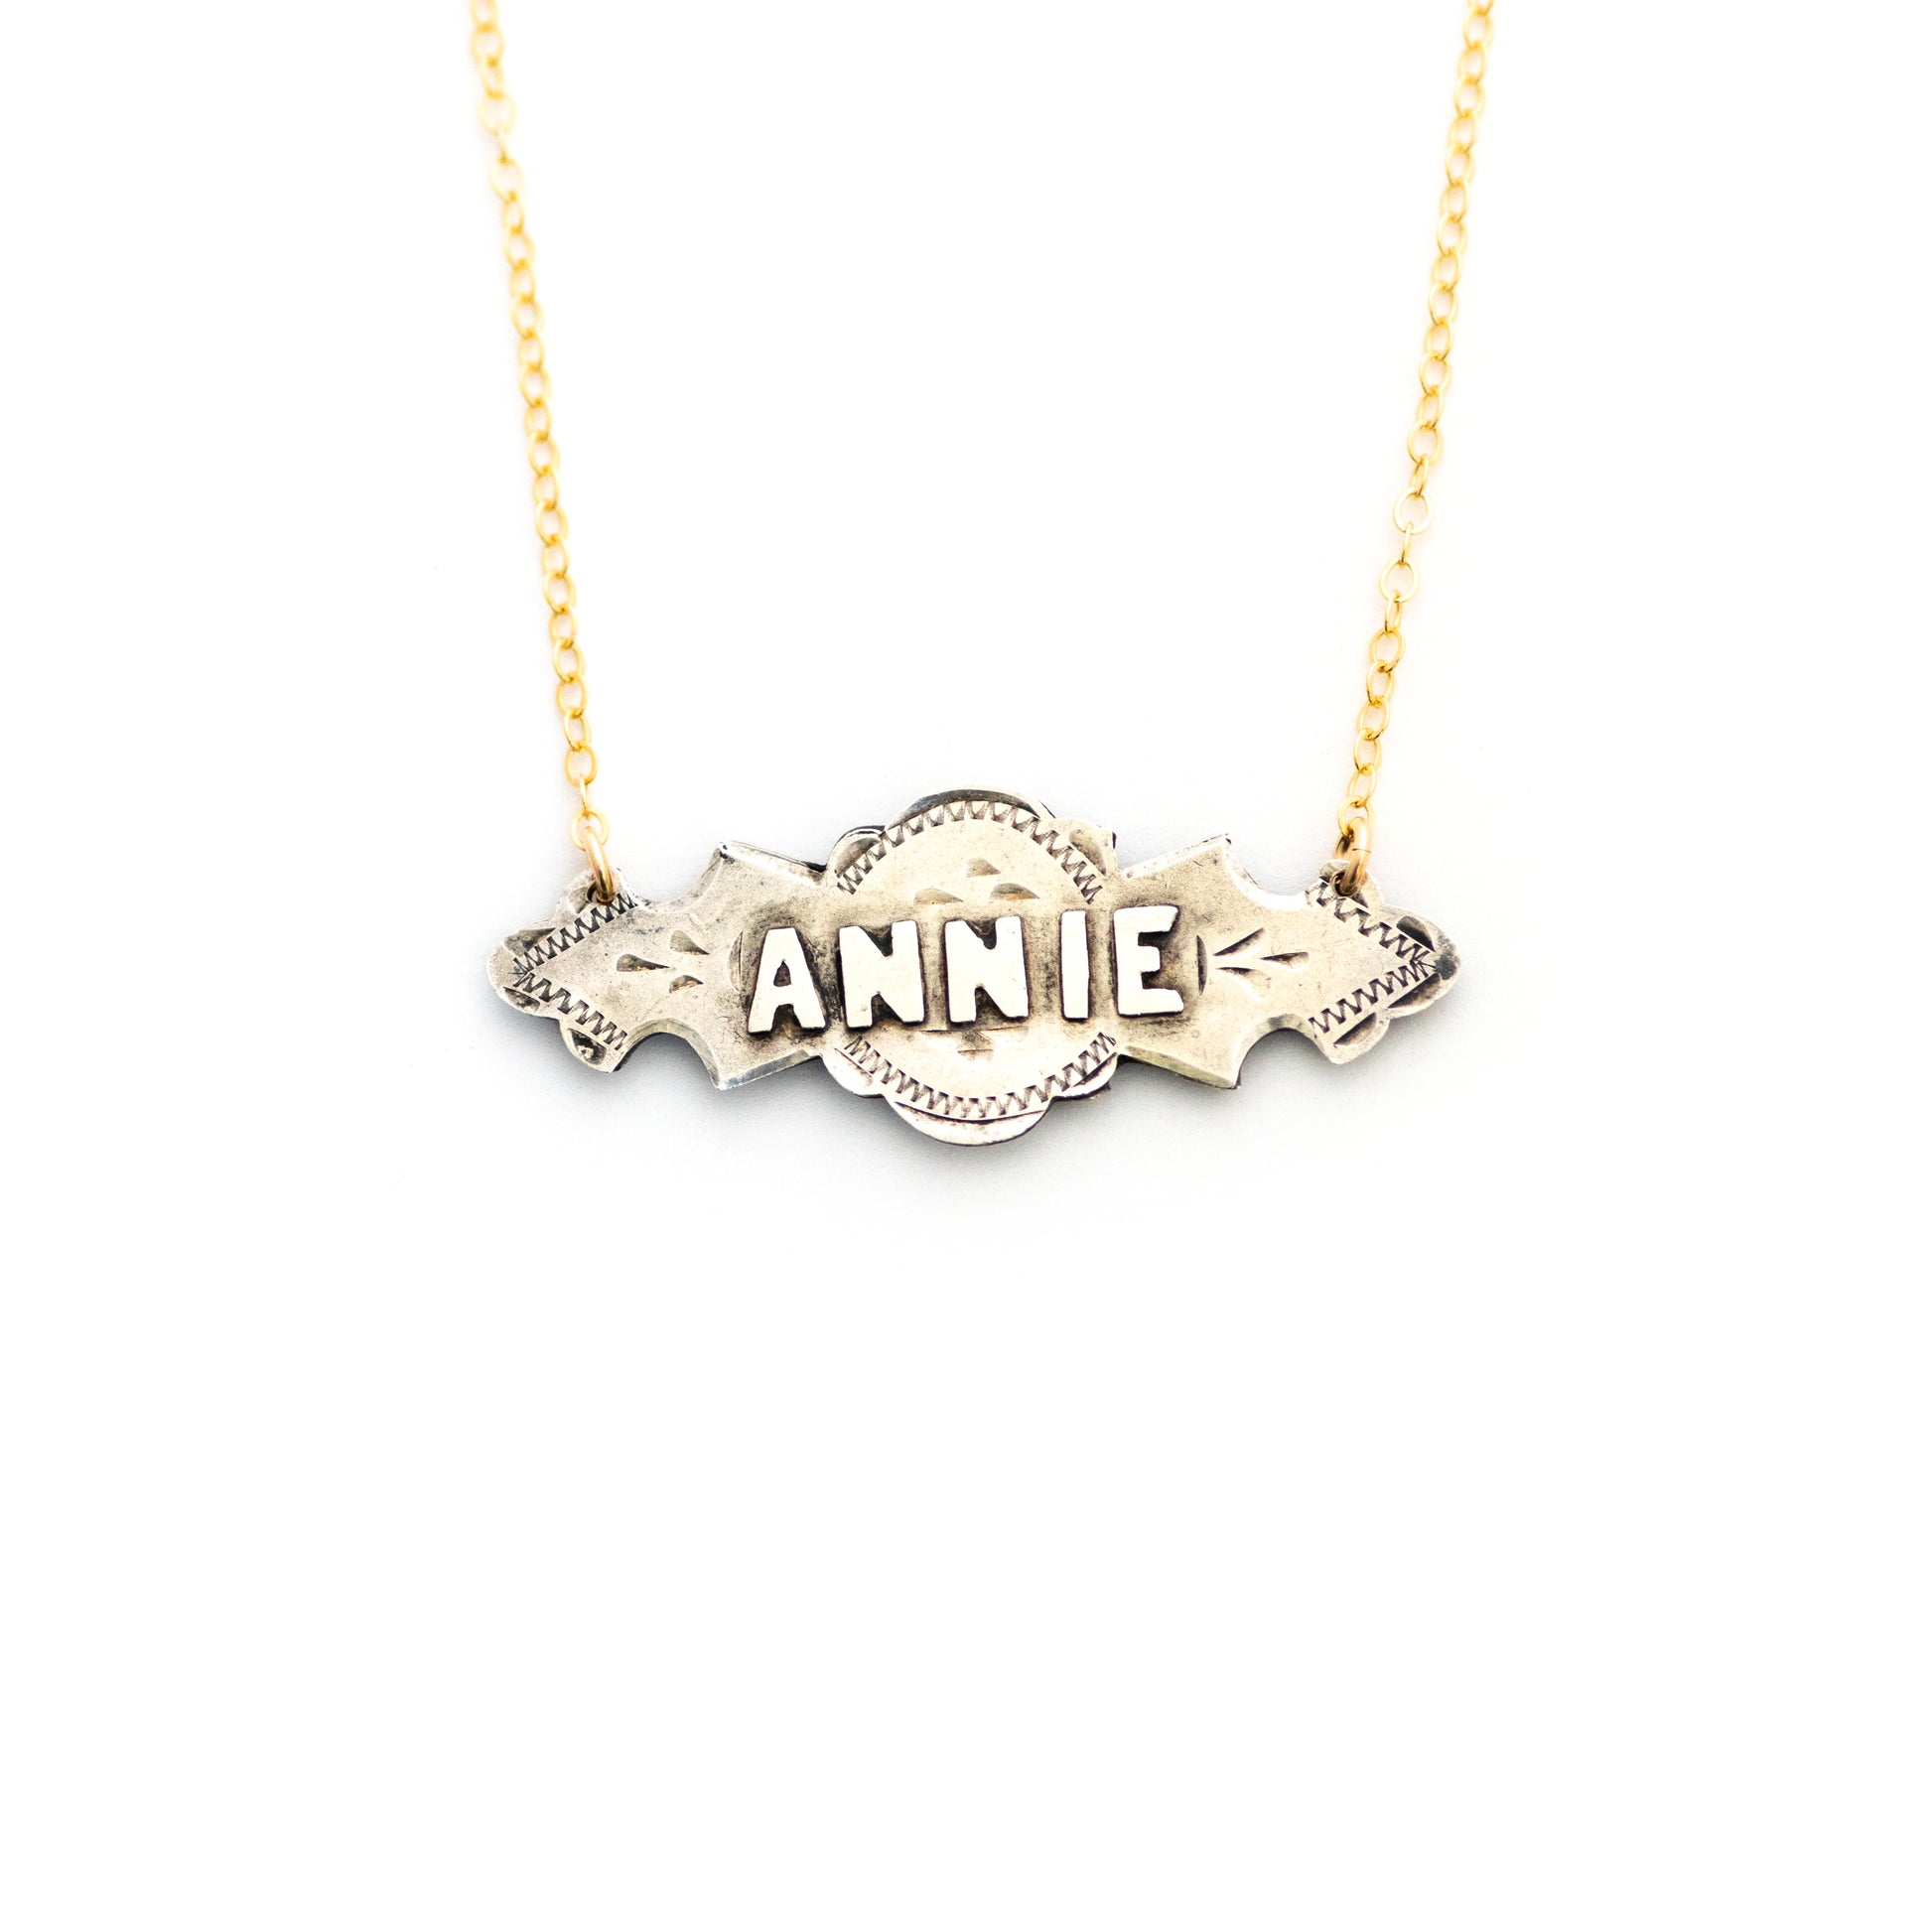 This one-of-a-kind conversion necklace is made up of:  Sterling silver Edwardian bar pin pendant from the early 1900s with hand engraved details and the name "ANNIE". 